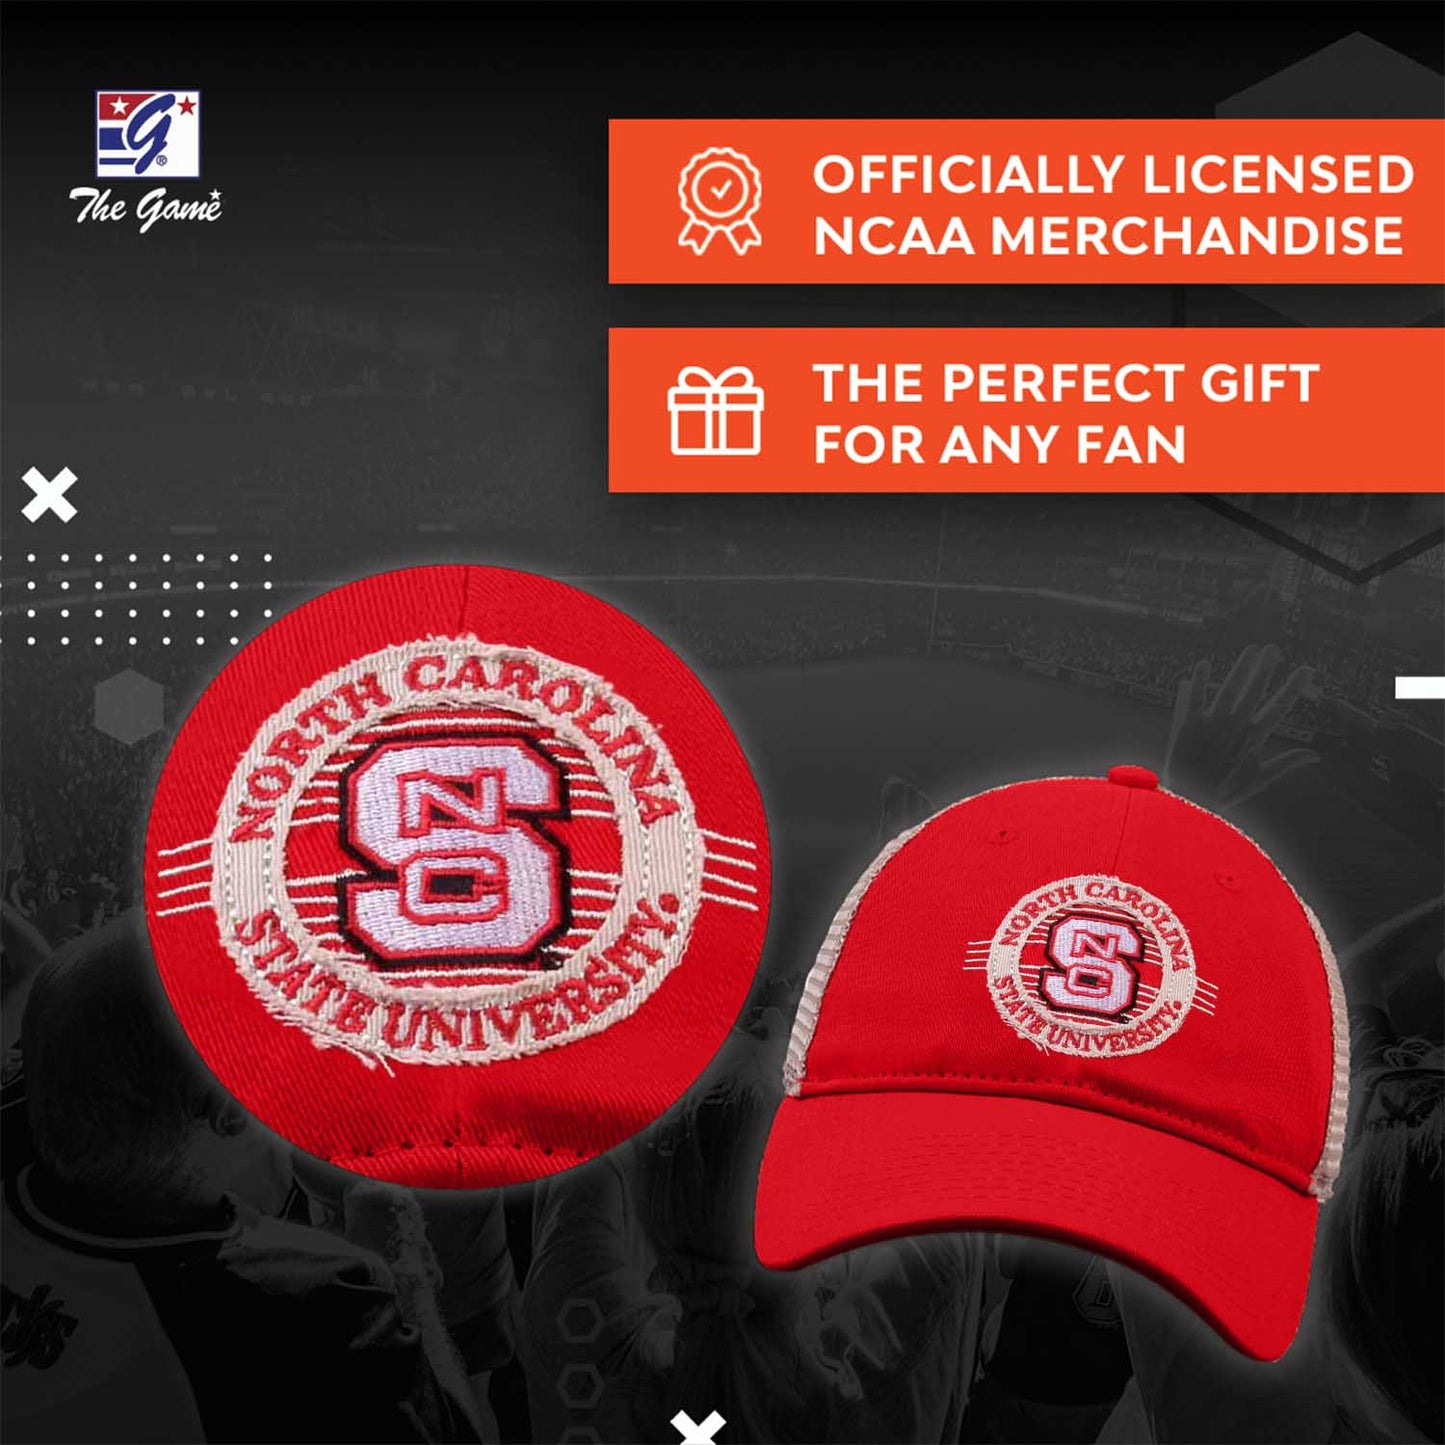 NC State Wolfpack NCAA Snapback - Red